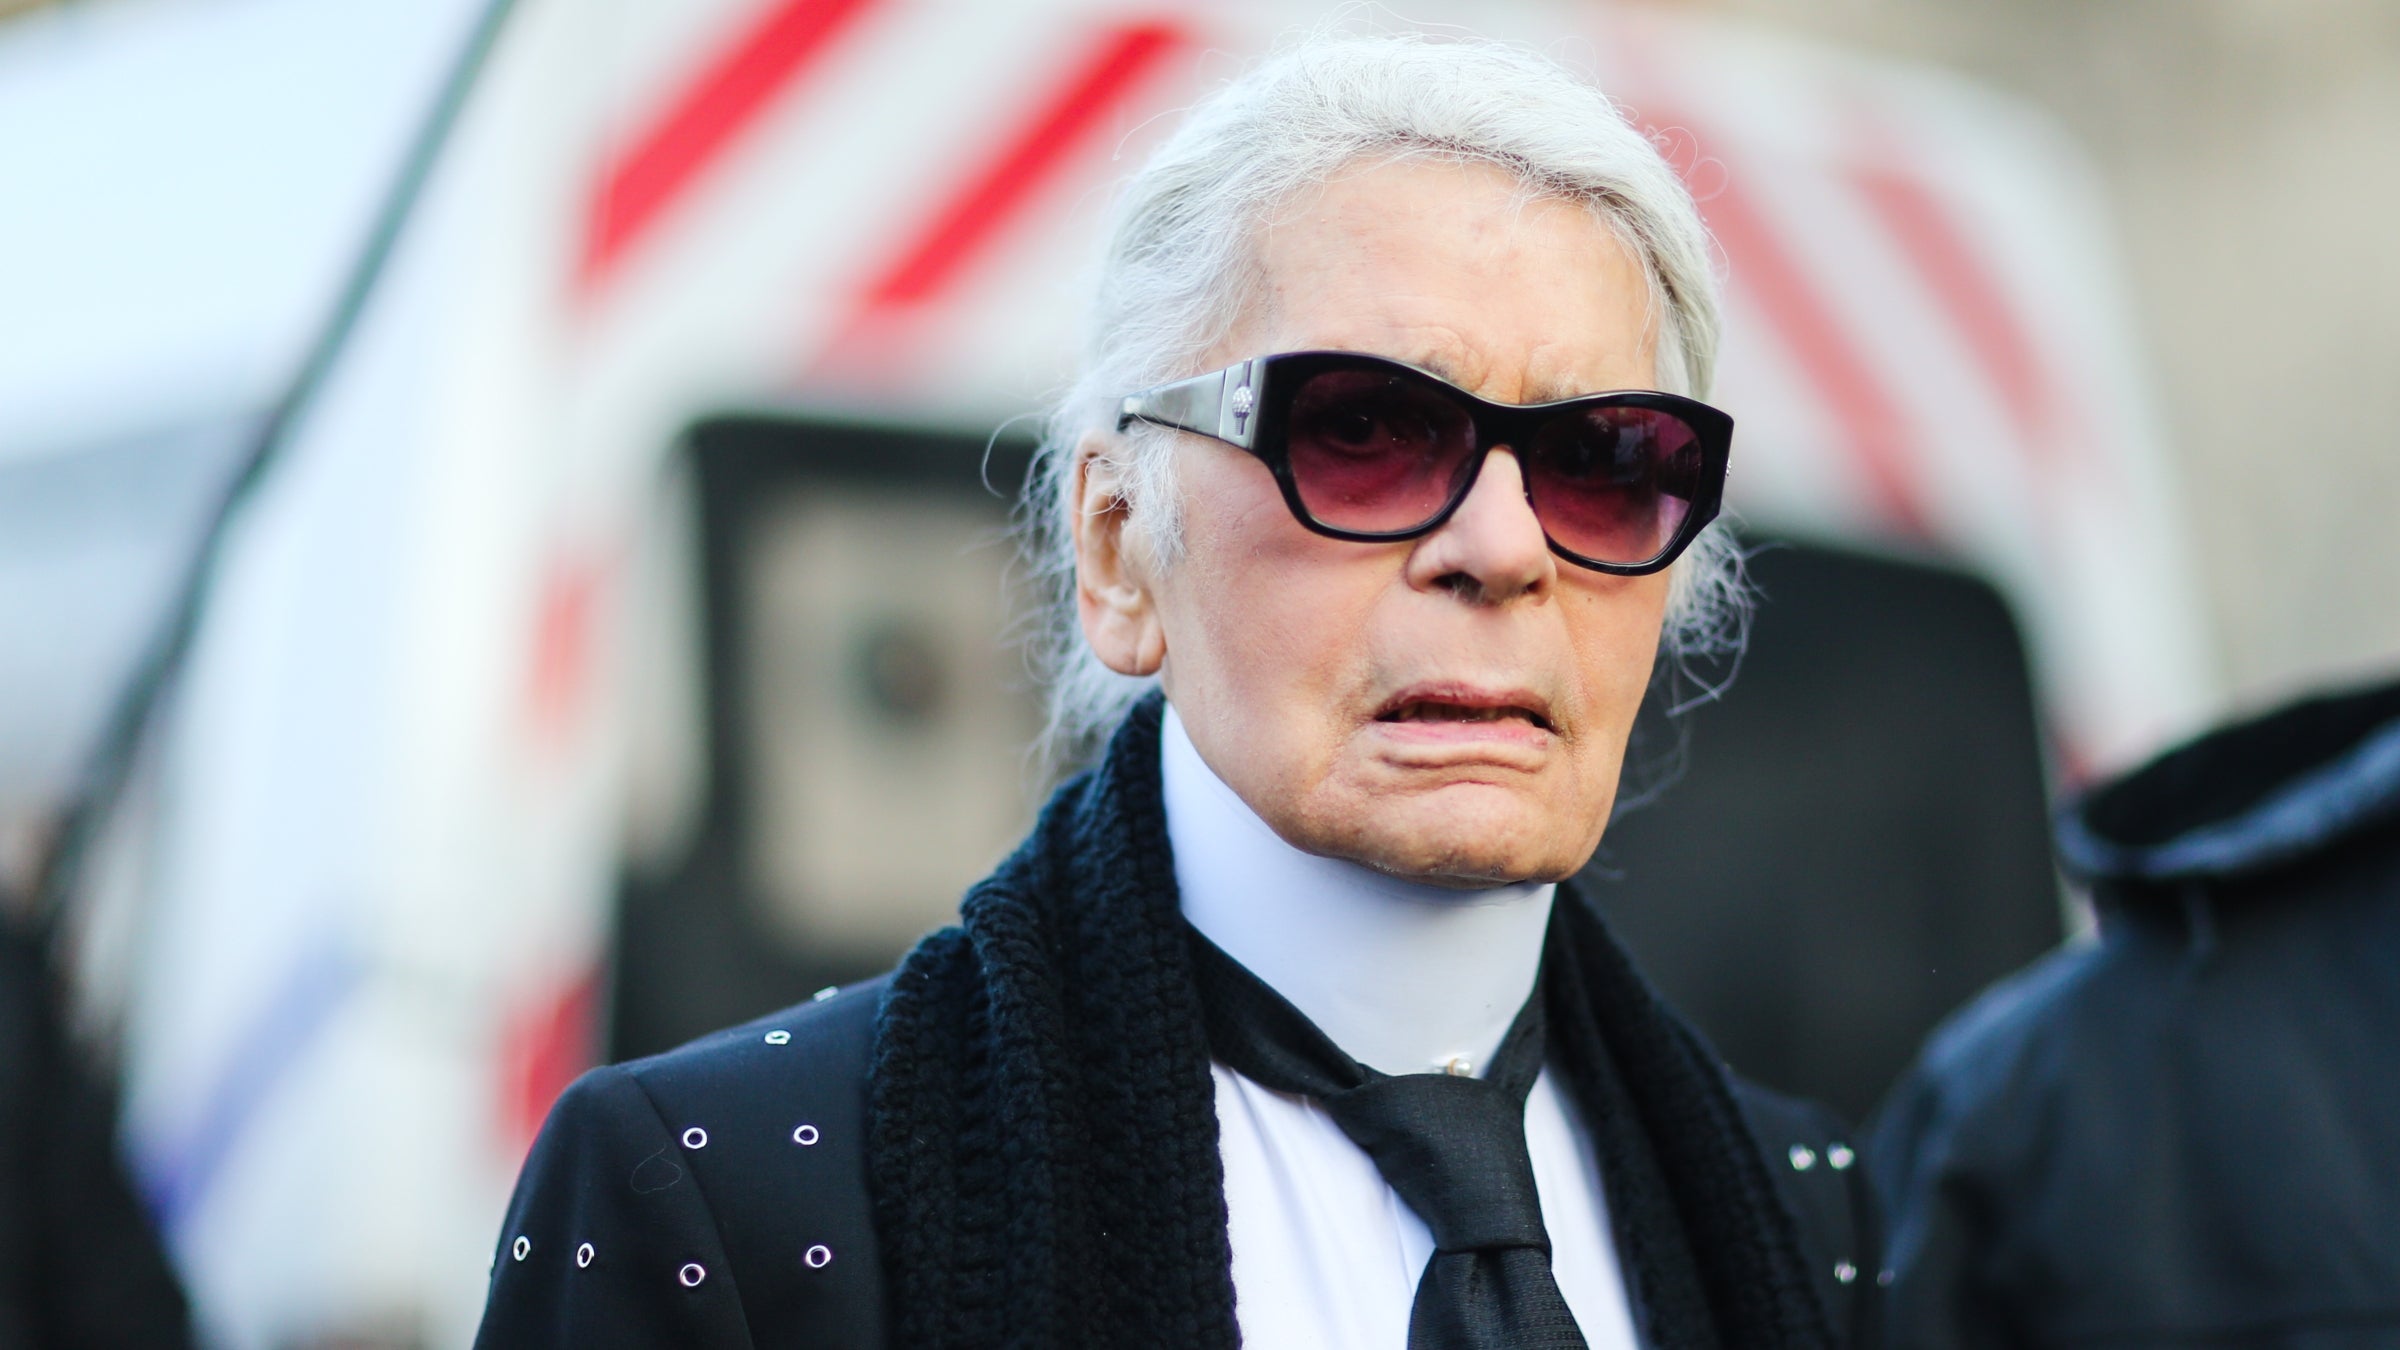 Karl Lagerfeld's Most Outrageous Outdoor Gear Designs